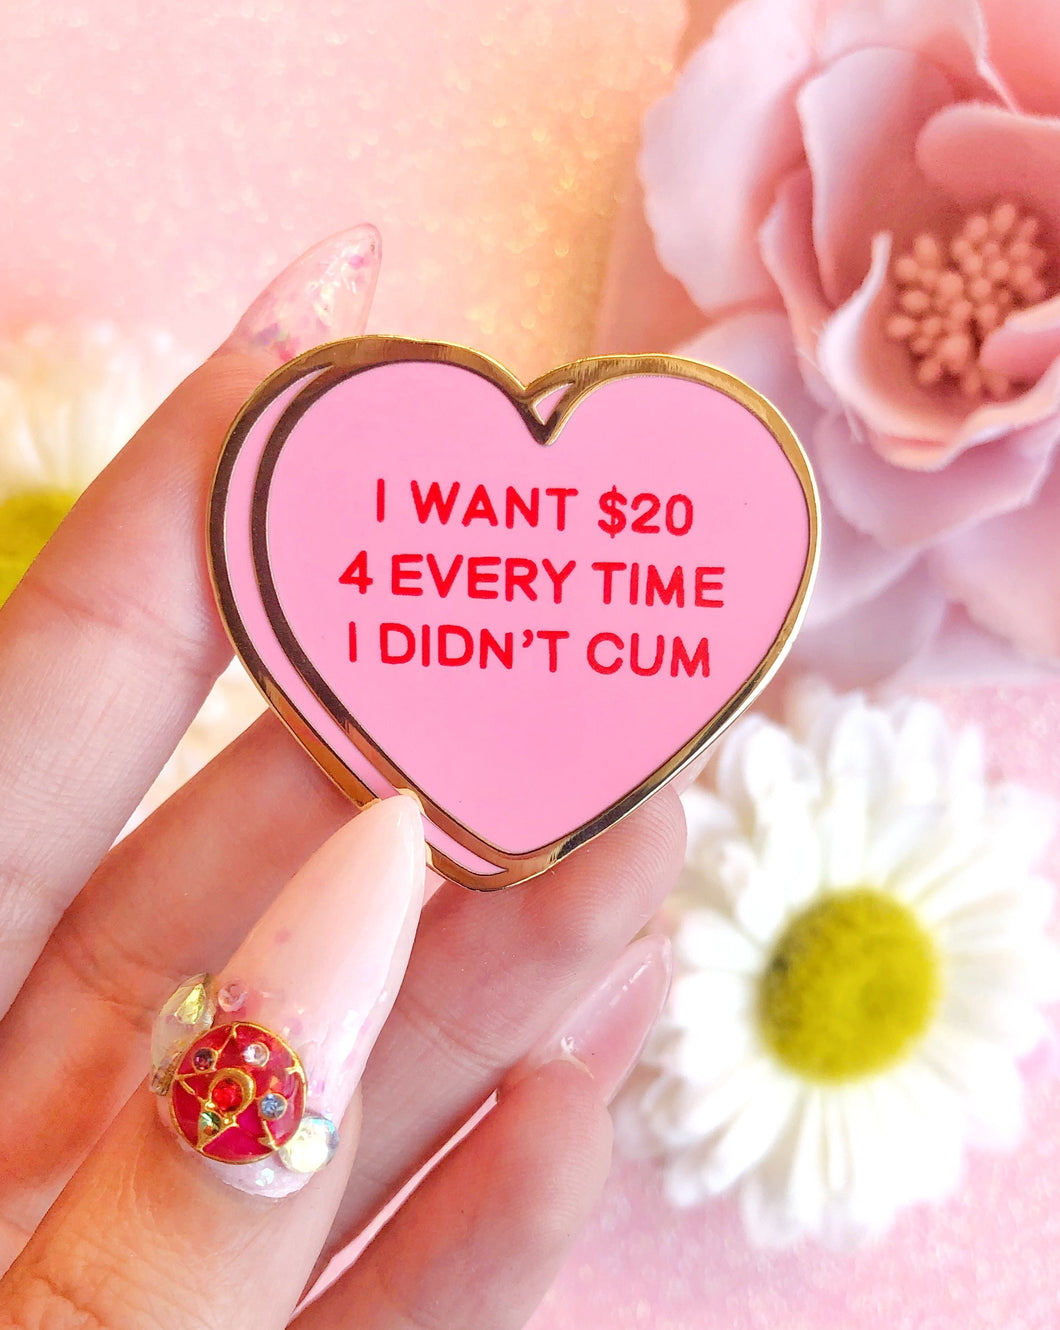 Pin on Products I Love + I Want